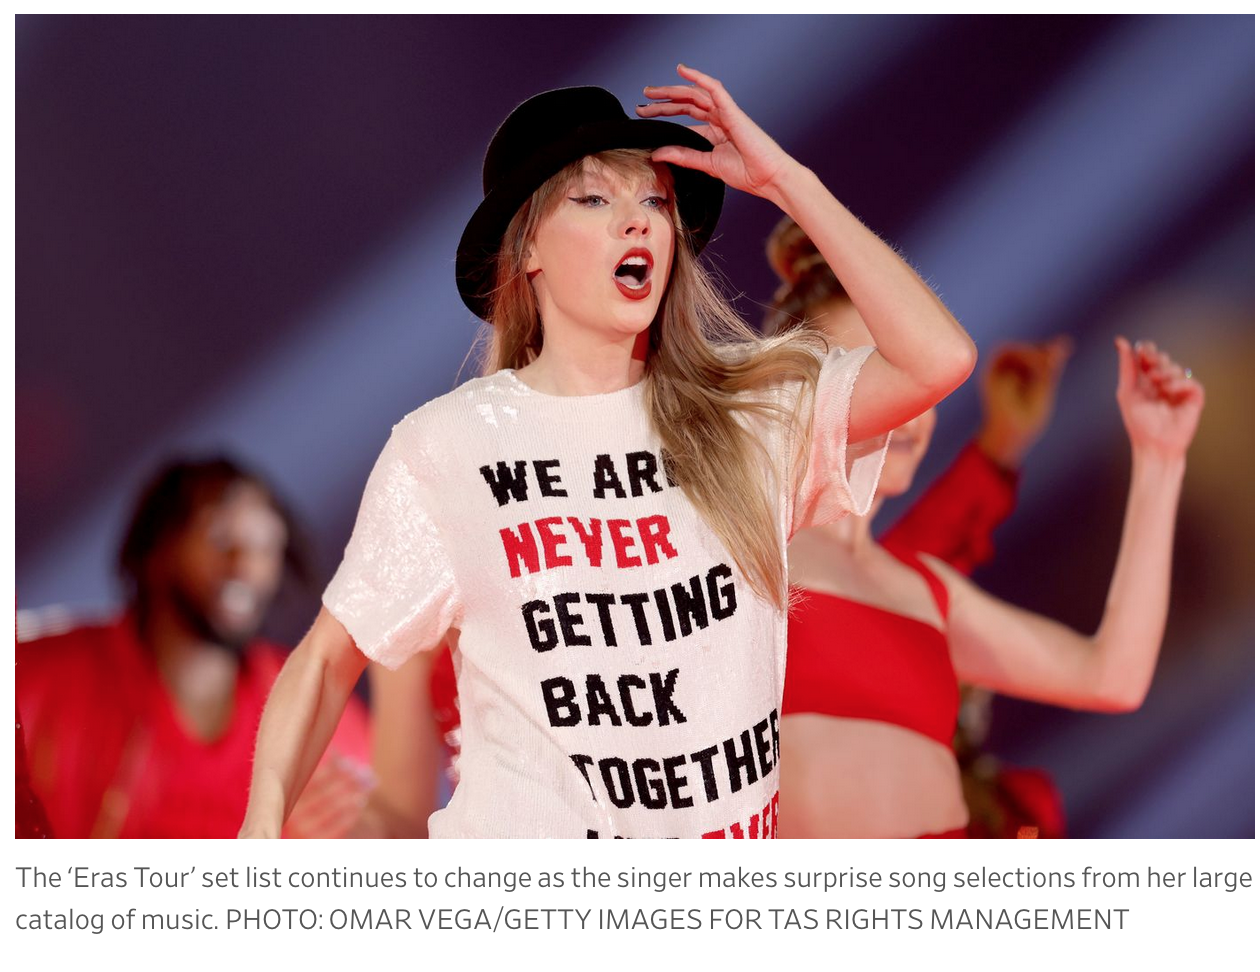 Taylor Swift Tries To Help Fellow Artists With New Universal Music Deal 